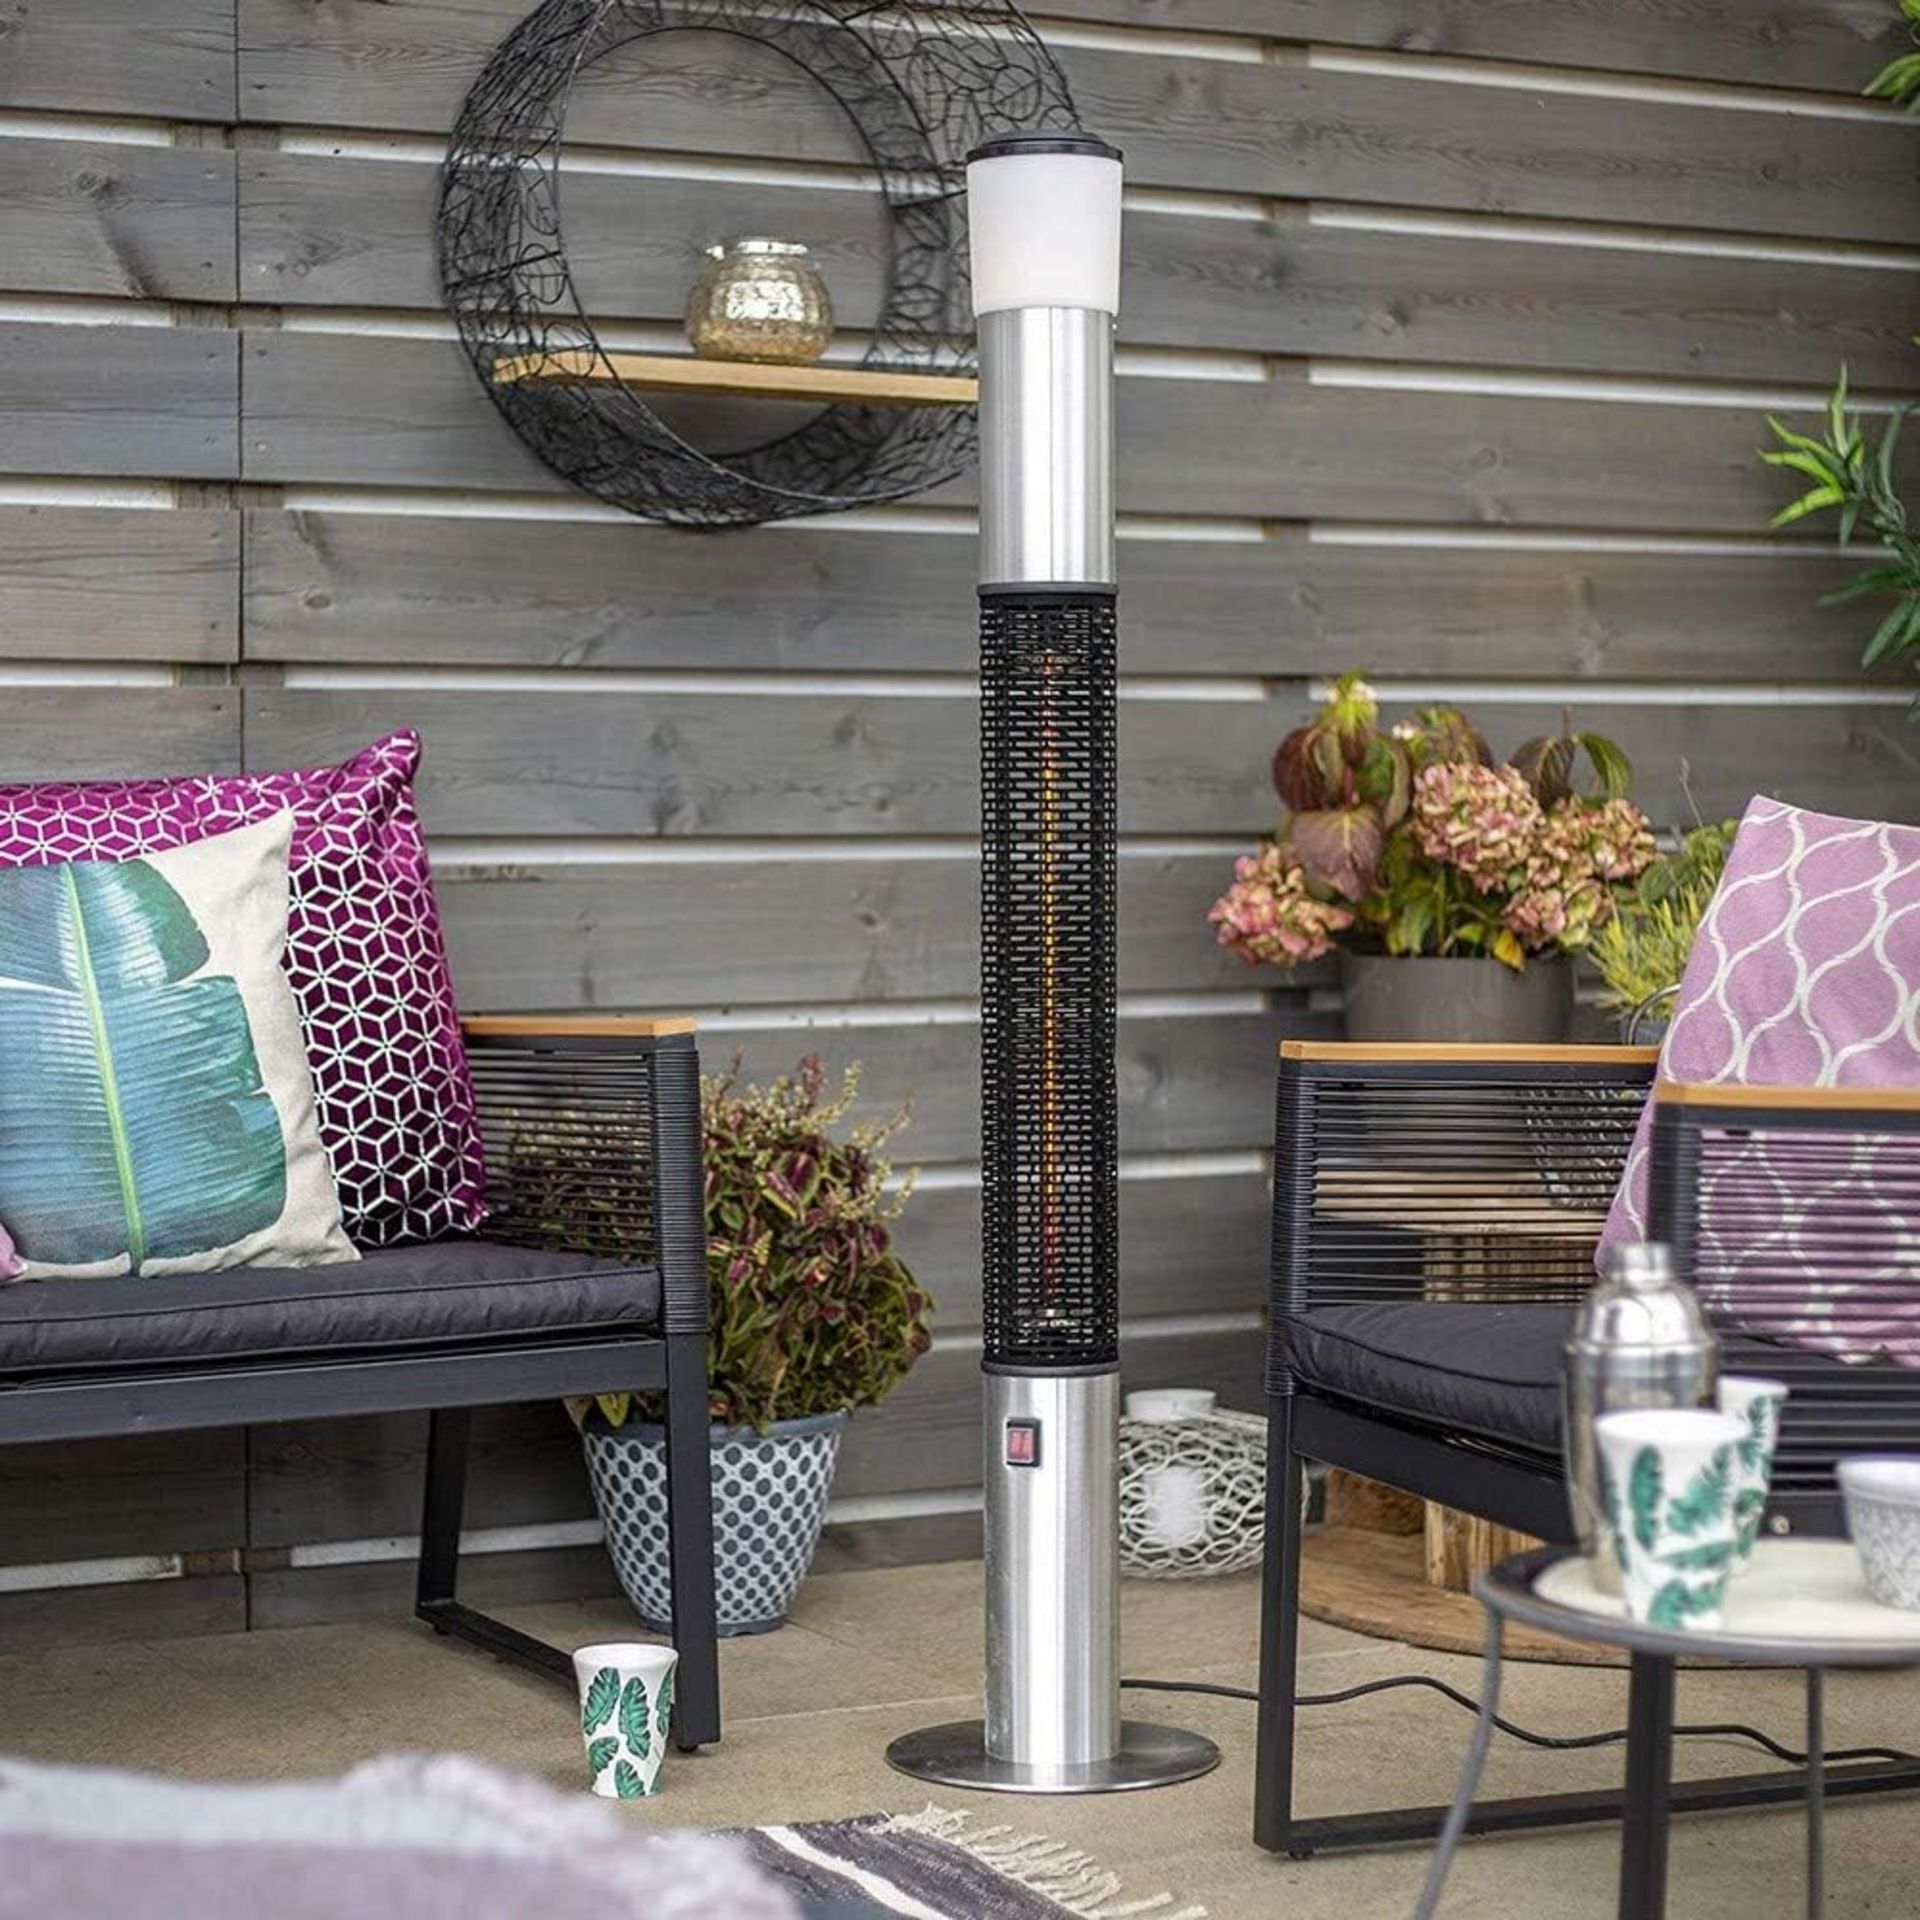 NEW & BOXED LA HACIENDA Stainless Steel Tower Heater With Speaker. RRP £179.99 EACH. (R16R). The